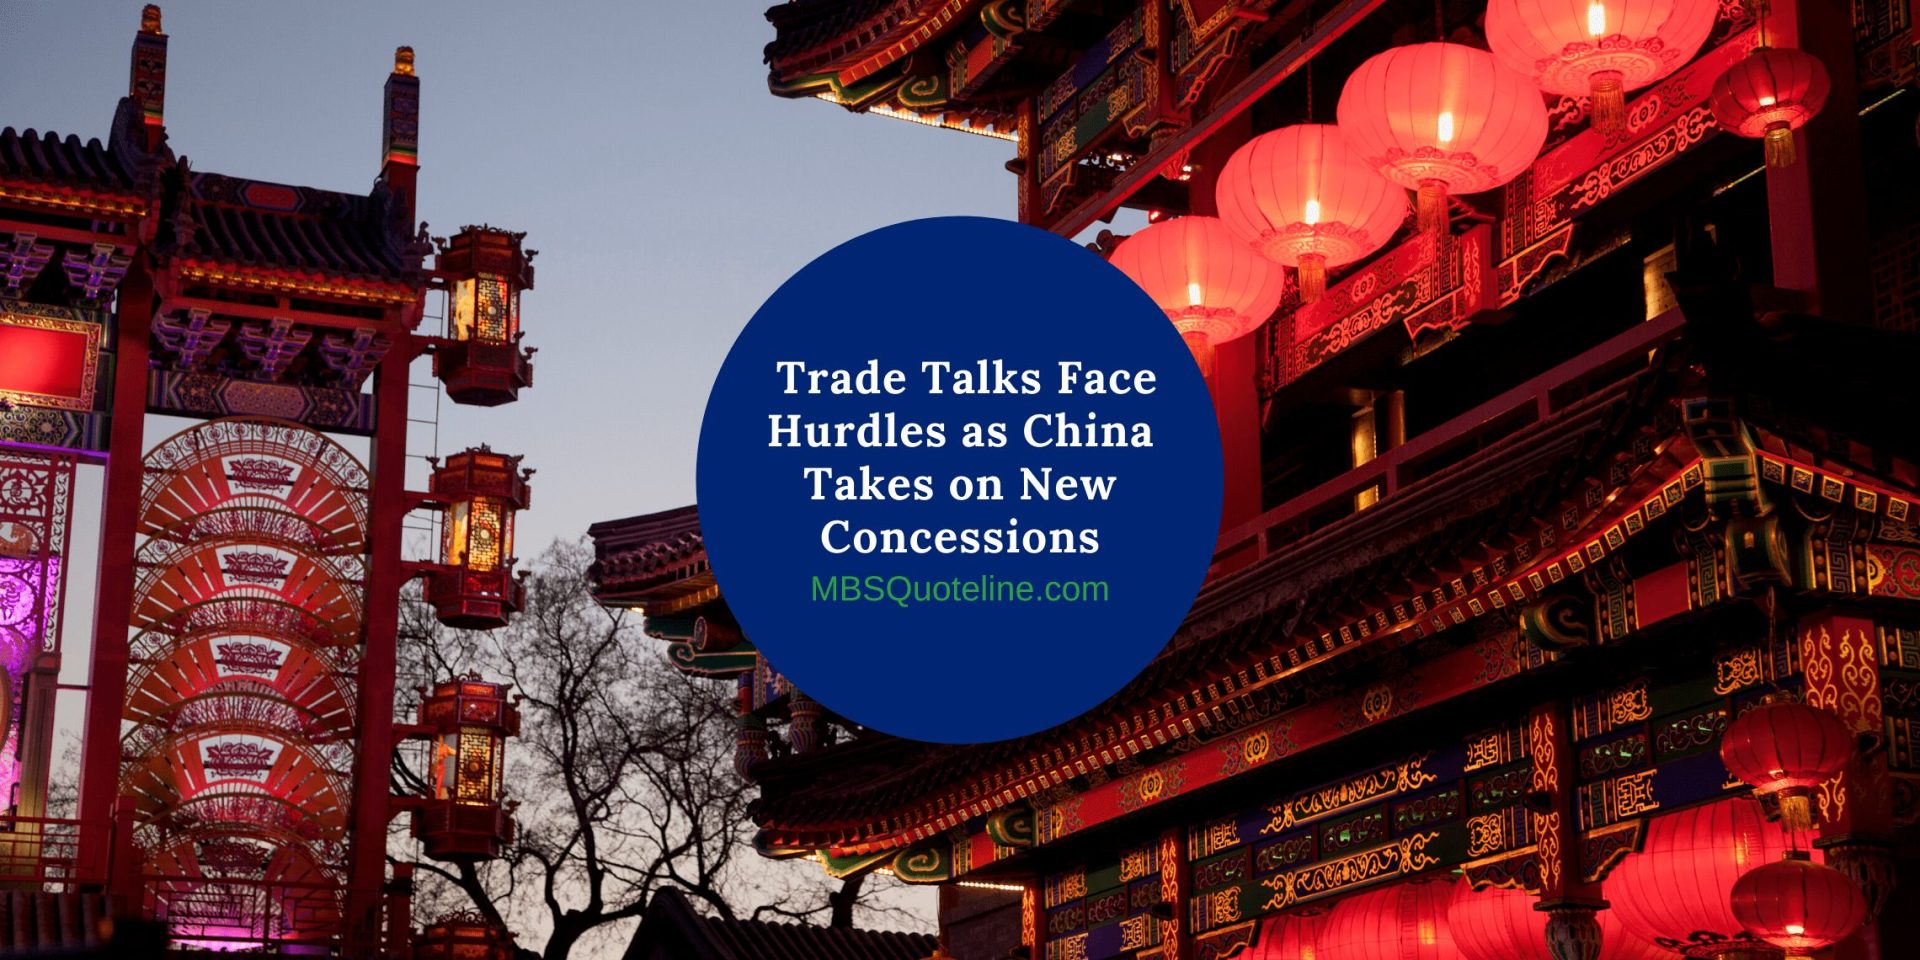 Trade Talks Face Hurdles as China Takes on New Concessions featured mortgagetime mbsquoteline